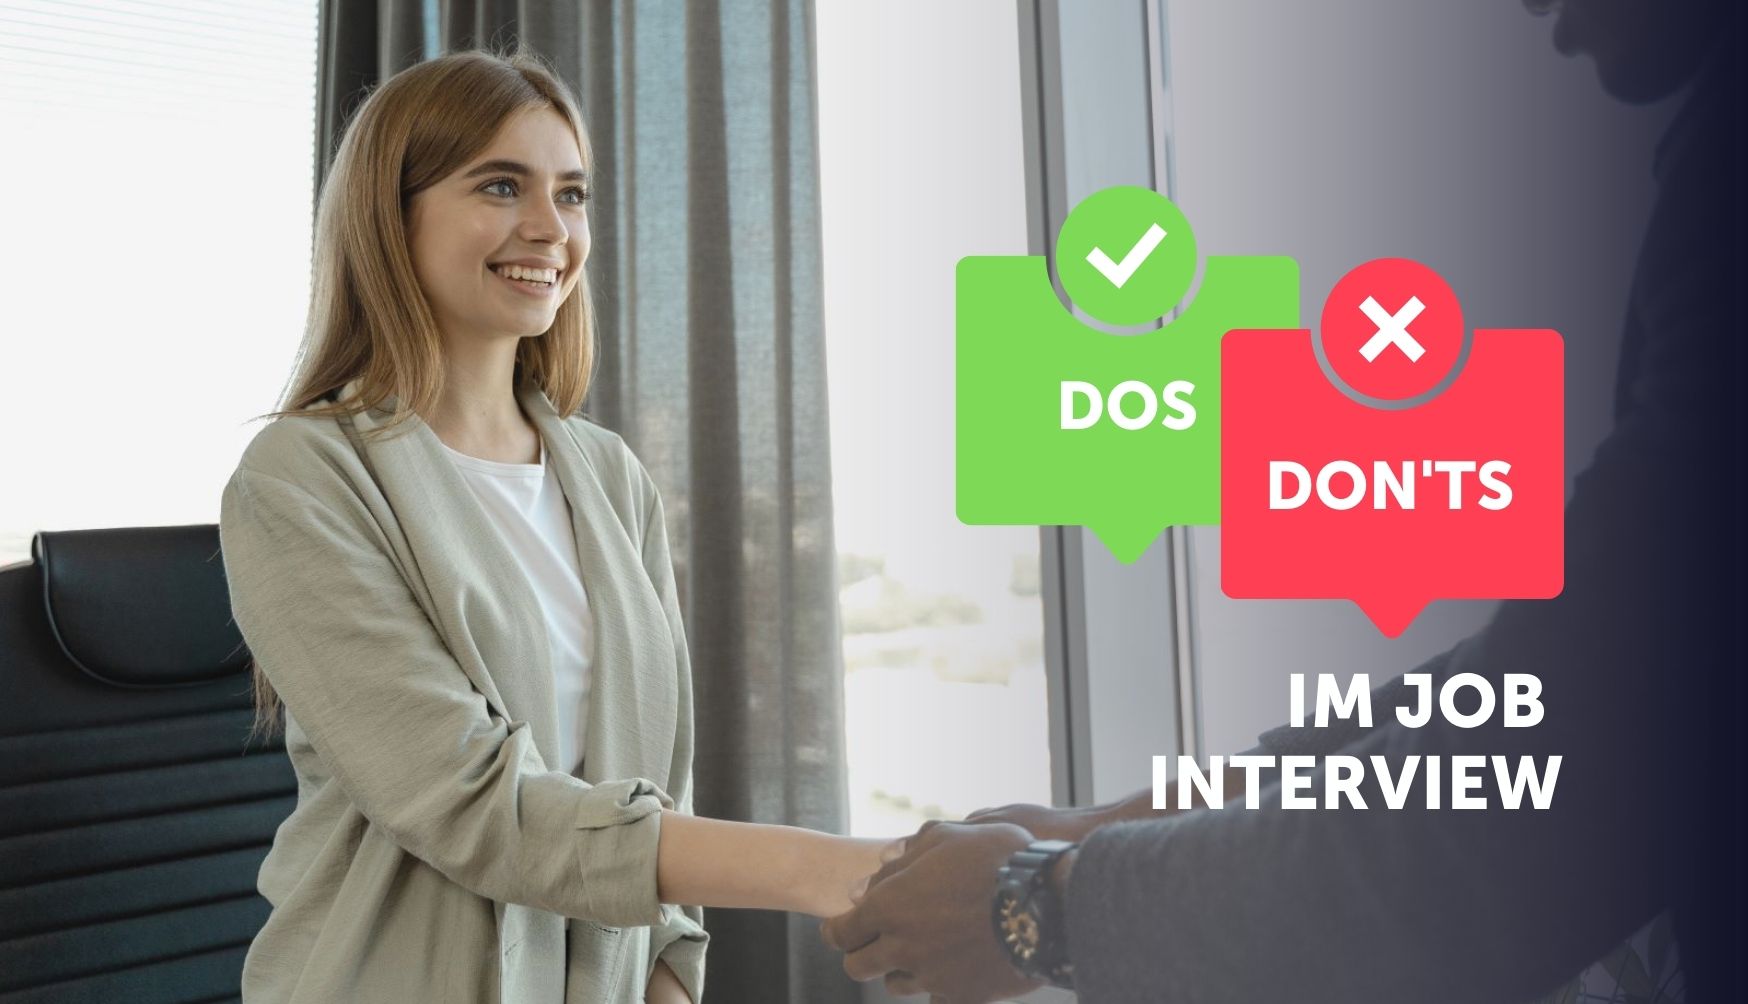 Dos and Don'ts in job interviews, girl smiling, shaking hands